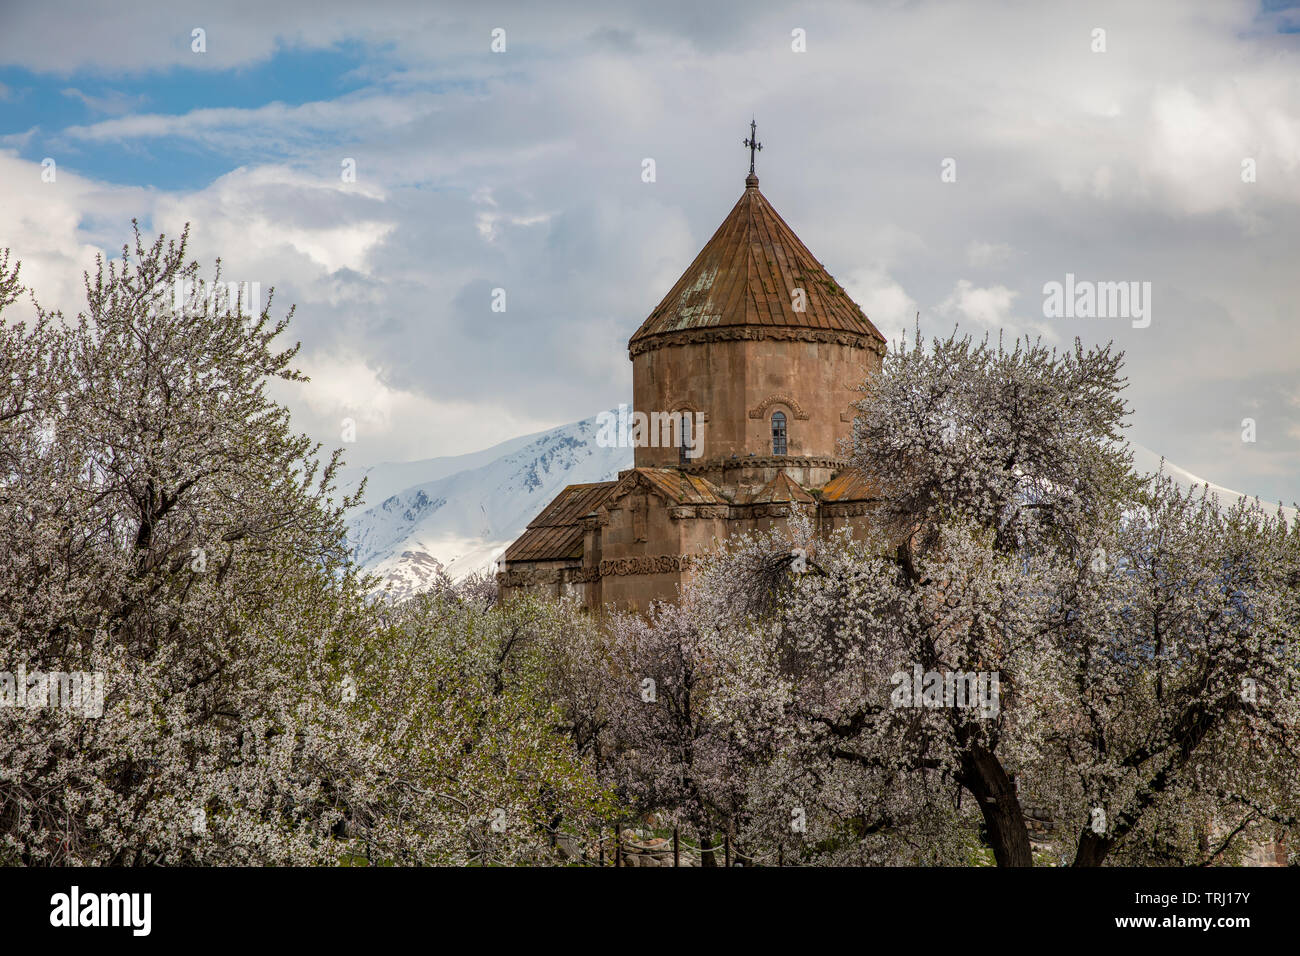 Amazing spring view of Armenian Church of the Holy Cross on Akdamar Island (Akdamar Adasi), Lake Van/Turkey. Surrounded by tree in blossom, in a middl Stock Photo